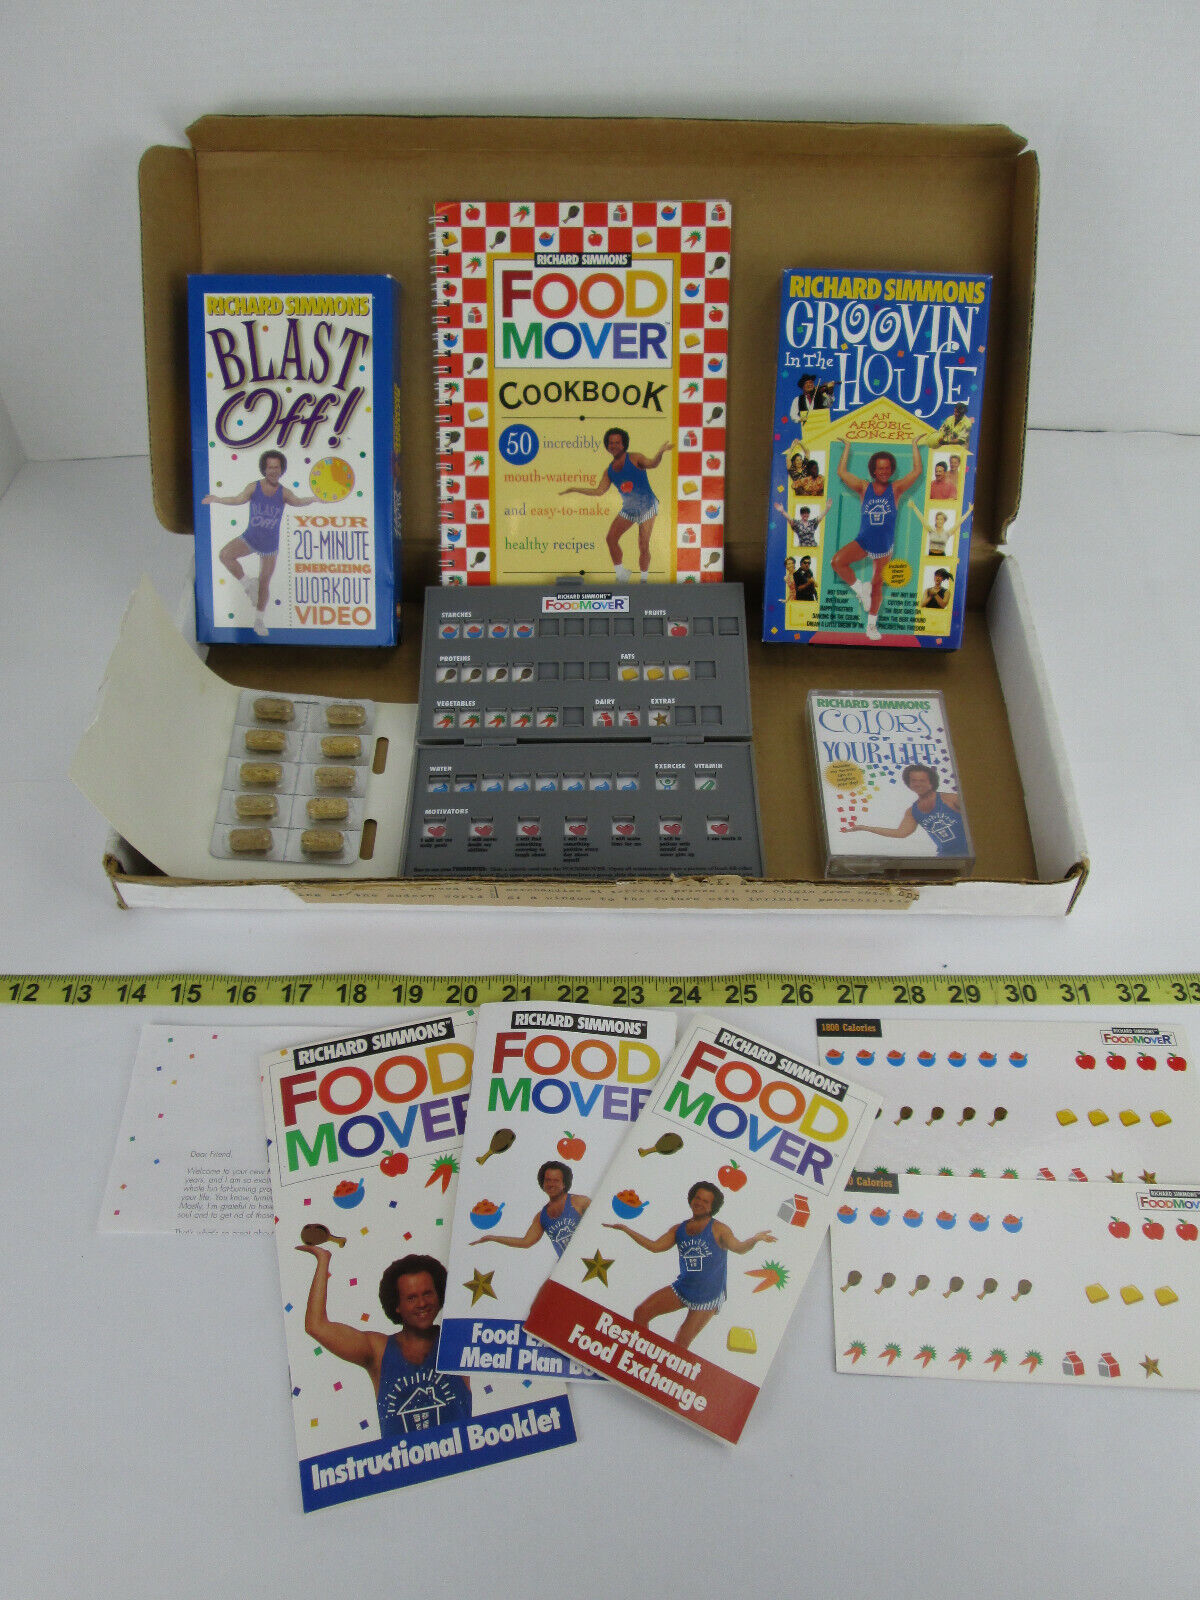 Richard Simmons Food Mover Weight Lose Kit Cookbook VHS Cassette Tapes Books